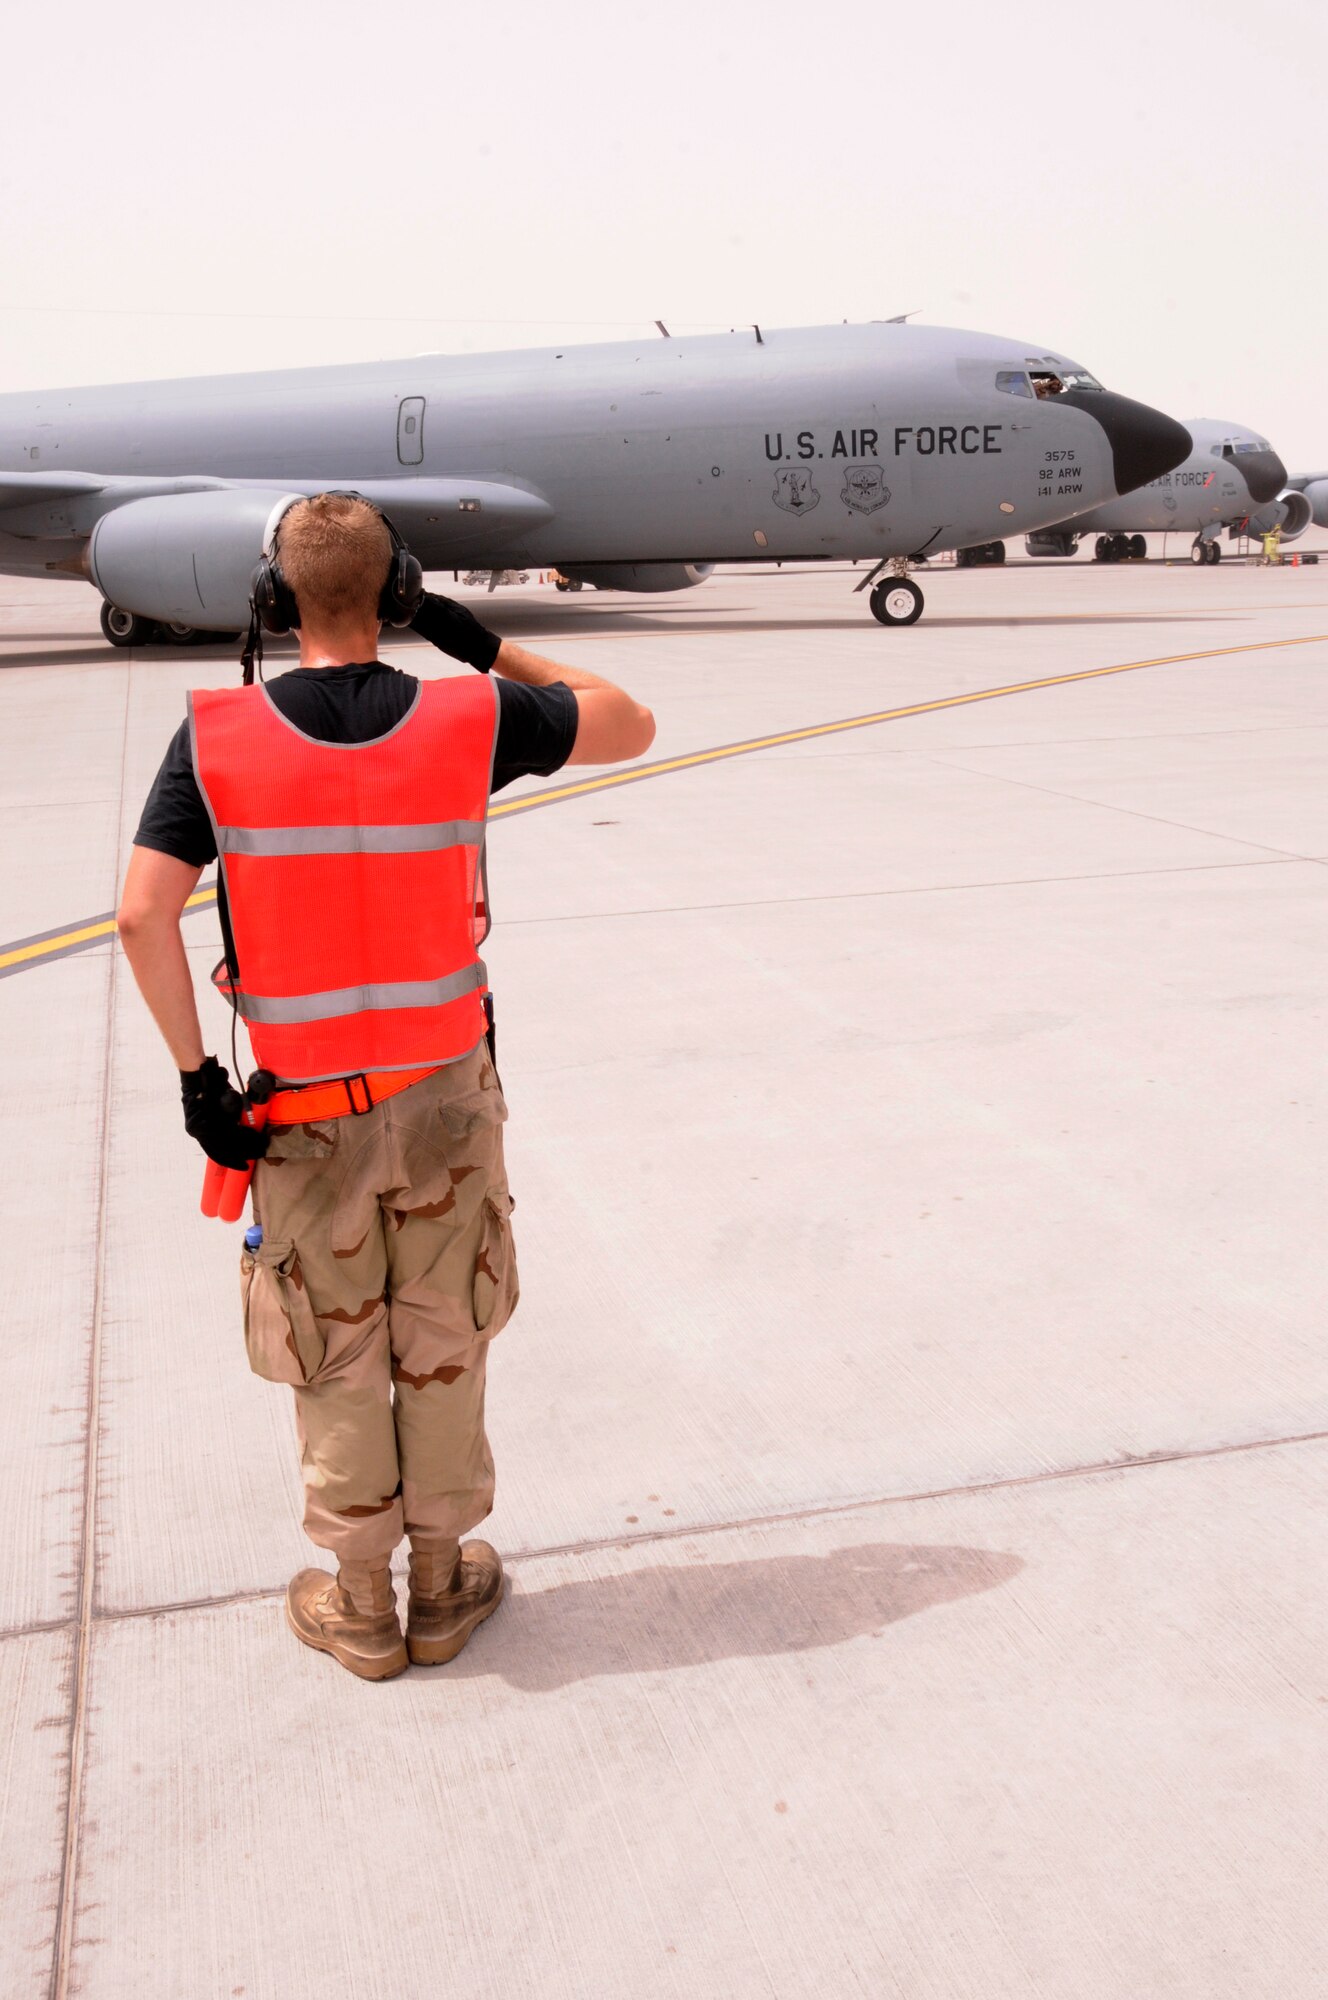 Airman 1st Class Derek Larue, assigned to the 340th Expeditionary Aircraft Maintenance Squadron from Grand Forks Air Force Base, N.D., salutes a KC-135 he has just marshaled out of its parking spot here at an undisclosed location in Southwest Asia Aug. 3, 2008.  Members of the 340th launch, recover and perform maintenance on the KC-135 aircraft which refuels all types of bombers, fighters and other support aircraft engaged in Operations Iraqi Freedom, Enduring Freedom and Combined Joint Task Force Horn of Africa..  (U.S. Air Force photo by Tech. Sgt. Michael Boquette/RELEASED)